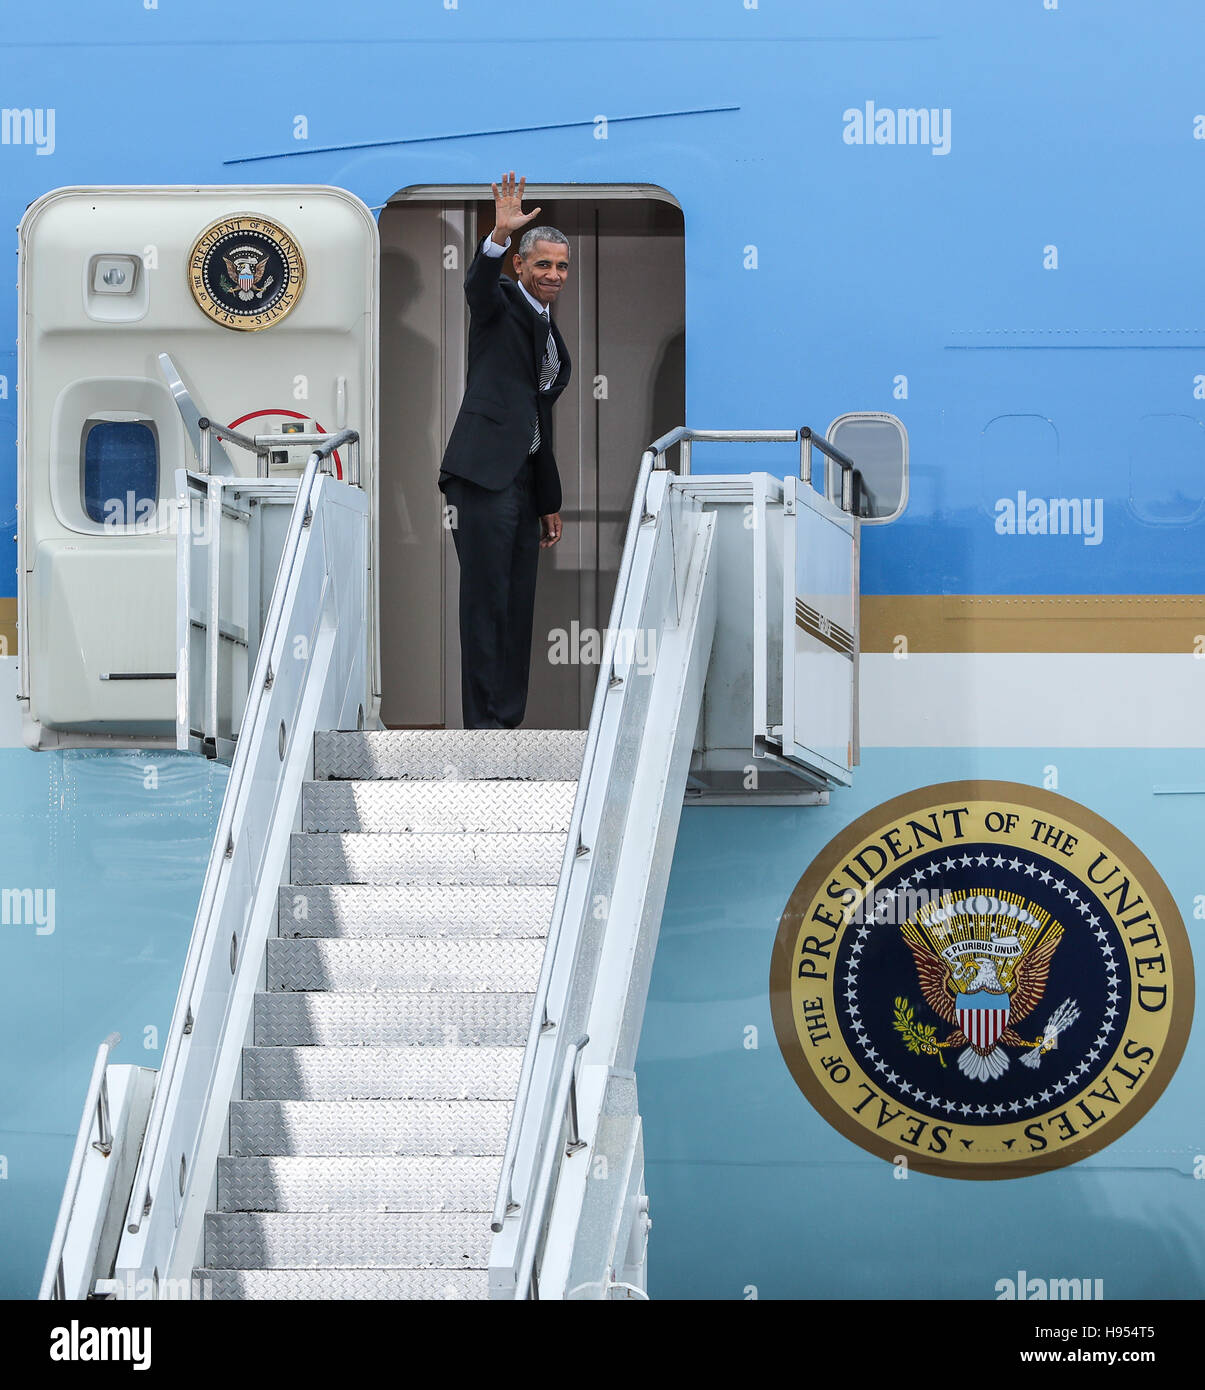 Berlin, Germany. 18th Nov, 2016. U.S. President Barack Obama waves as he boards Air Force One for departure at Tegel Airport in Berlin, capital of Germany, on Nov. 18, 2016. U.S. President Barack Obama left Berlin on Friday, ending his last visit to Germany and Europe during his term of office. Credit:  Shan Yuqi/Xinhua/Alamy Live News Stock Photo